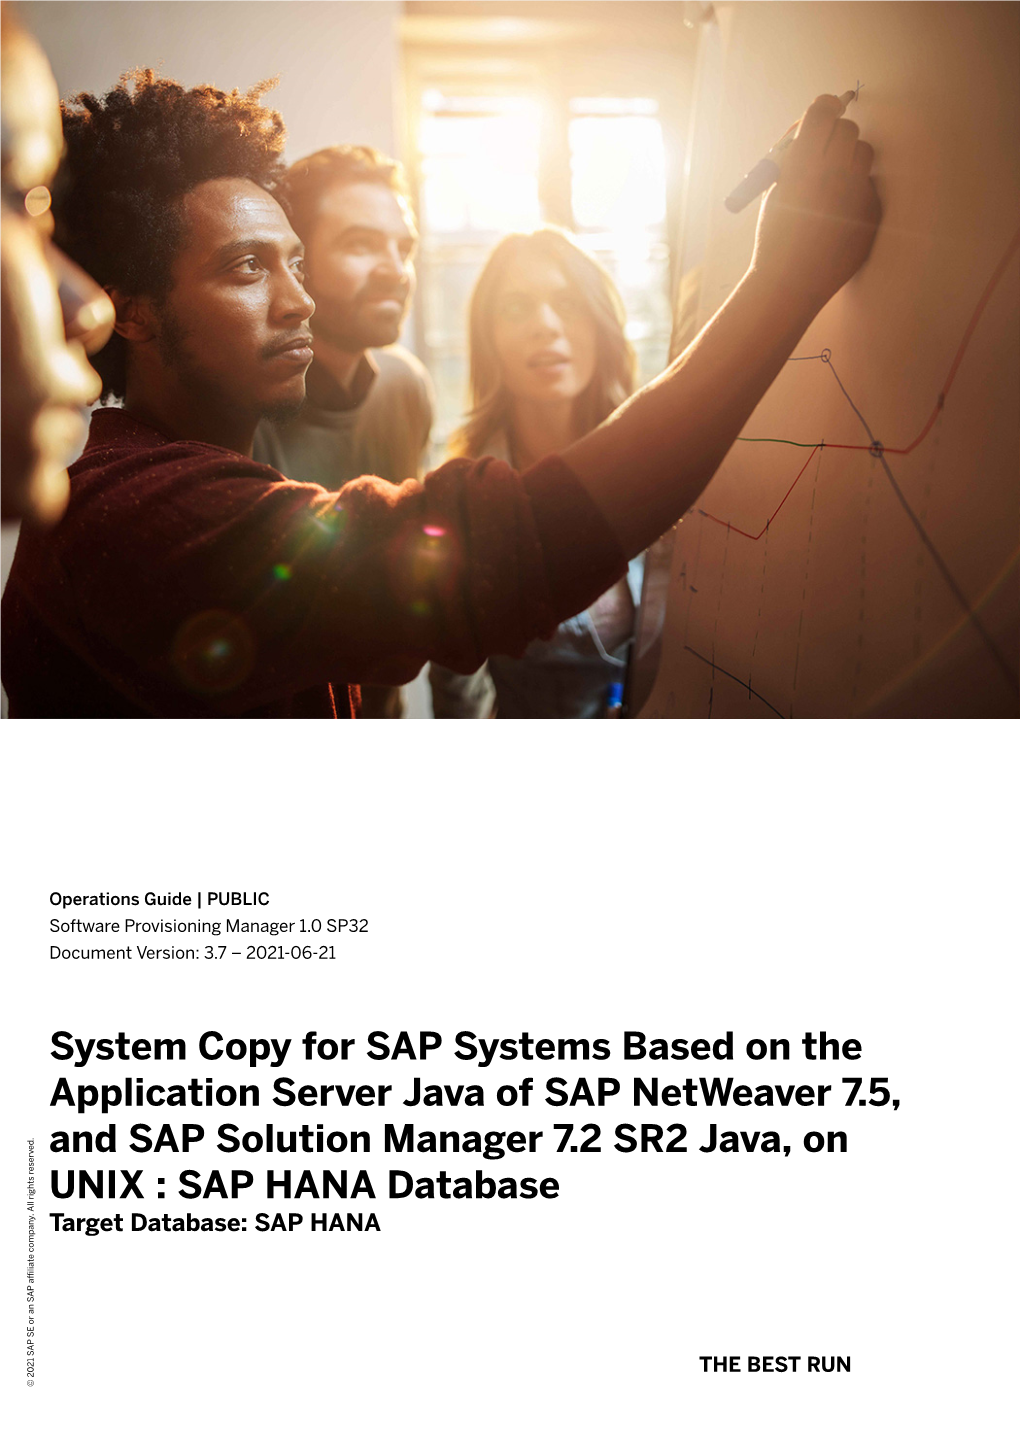 System Copy for SAP Systems Based on The